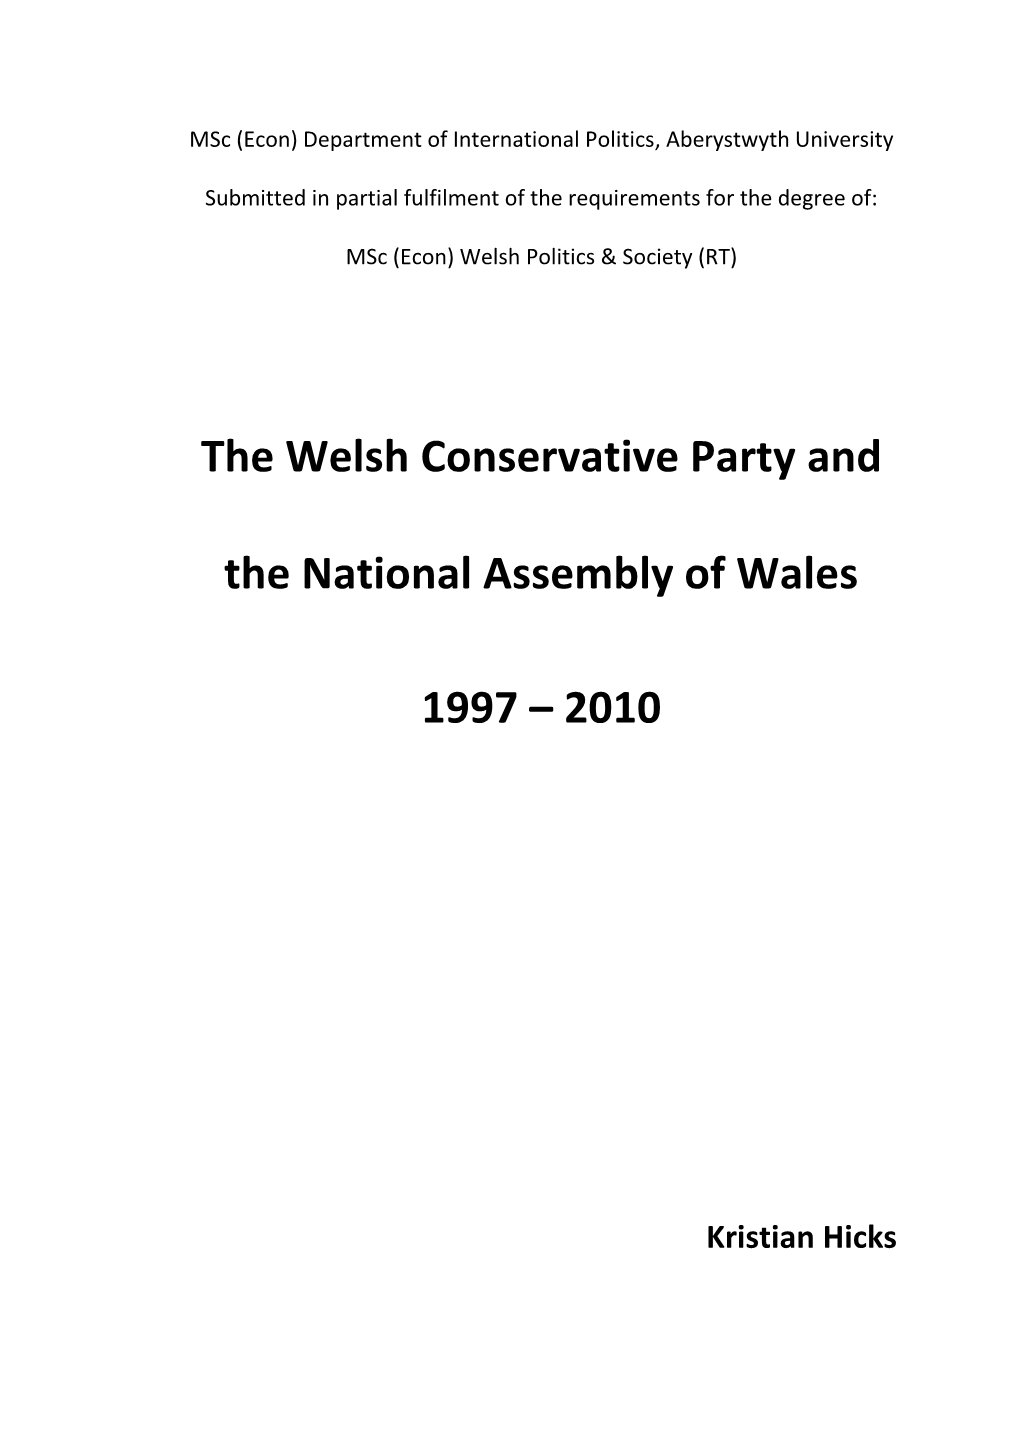 The Welsh Conservative Party and the National Assembly of Wales 1997